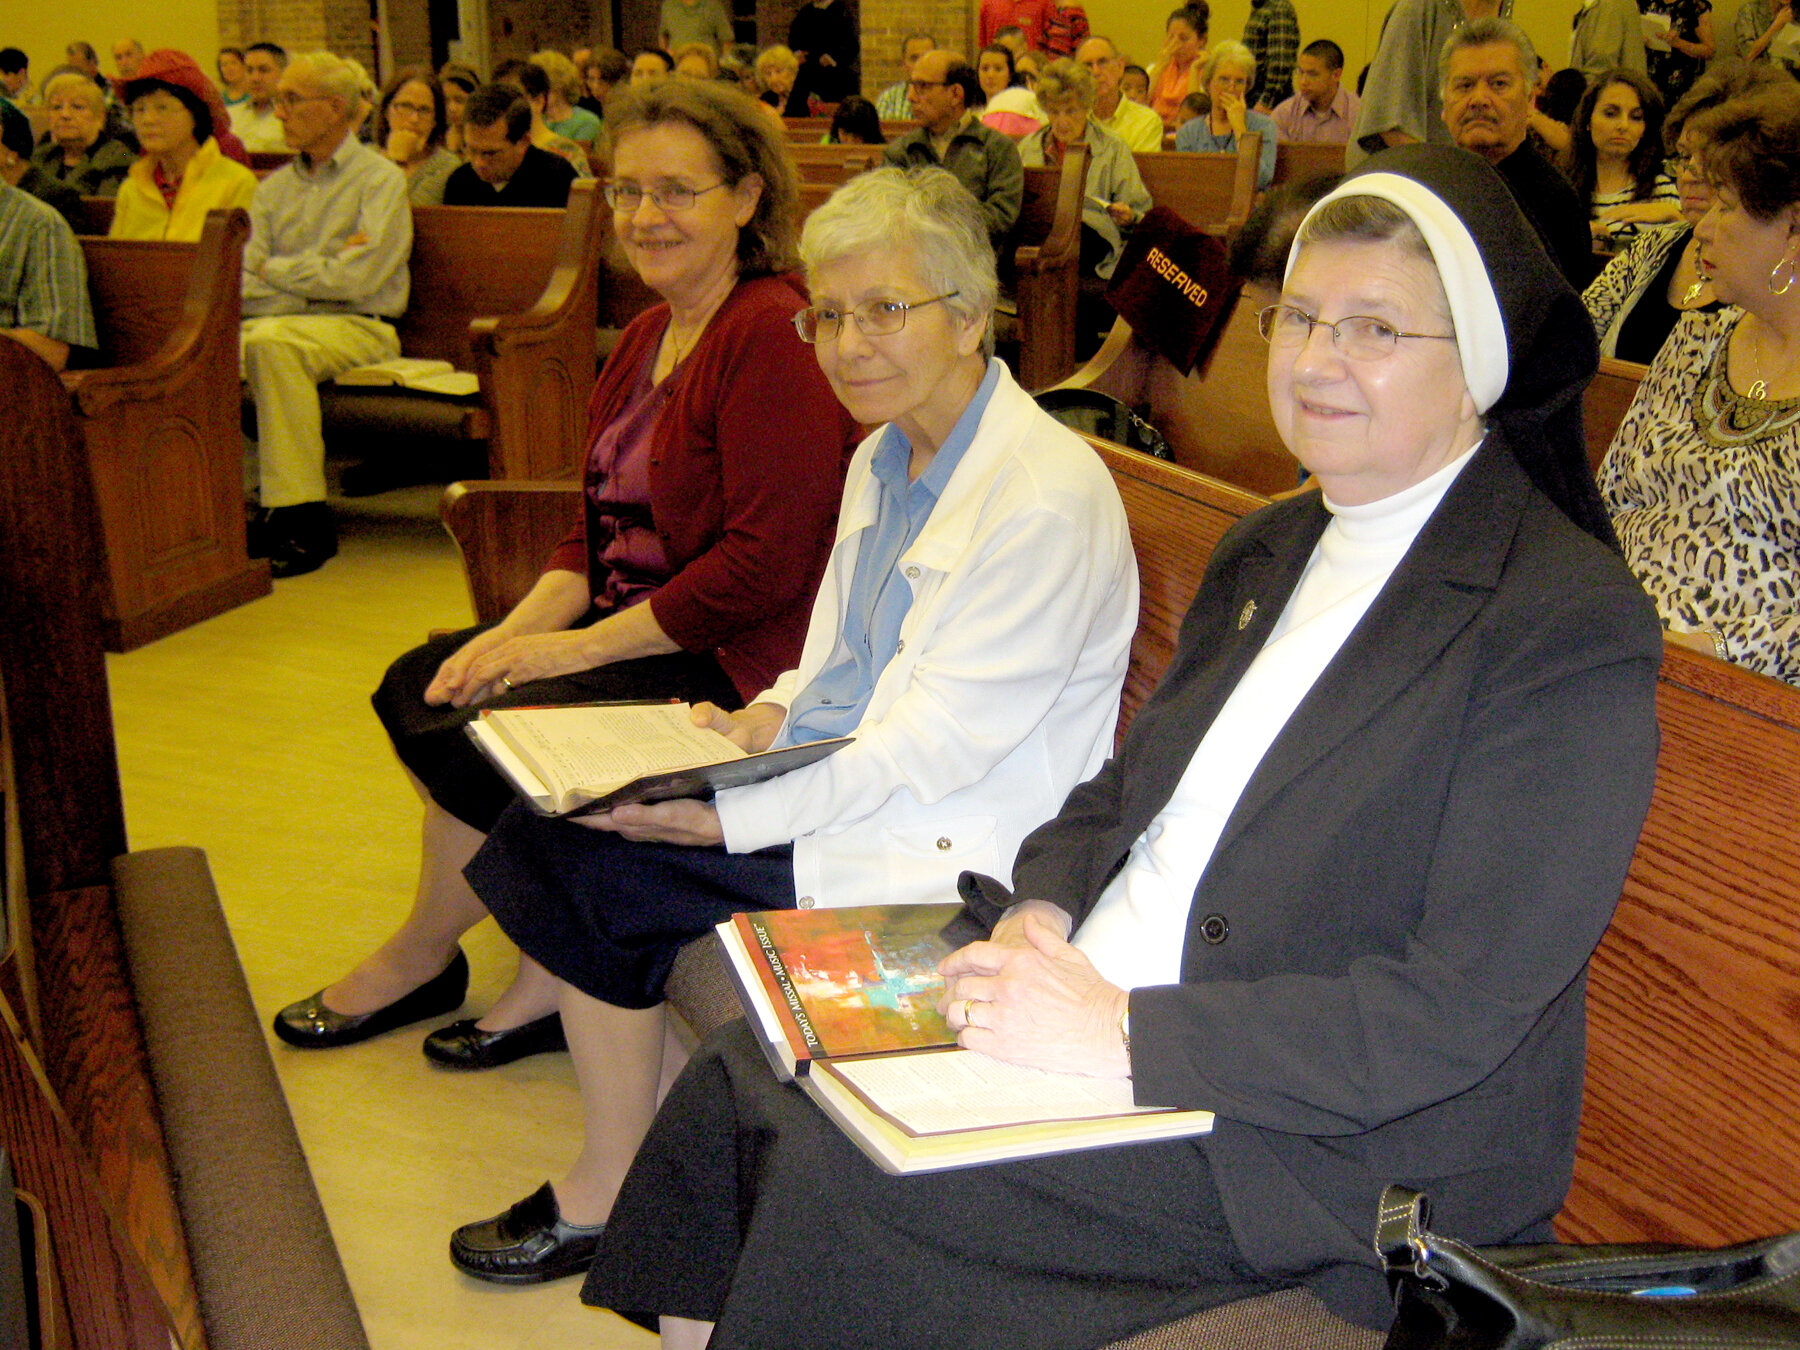  Sisters Jeanne Marie Ulica (right) and Jo Goolish (left) attend a reunion of the former St. Francis Academy in San Antonio, Texas, along with Sister Yolanda Escamilla. 